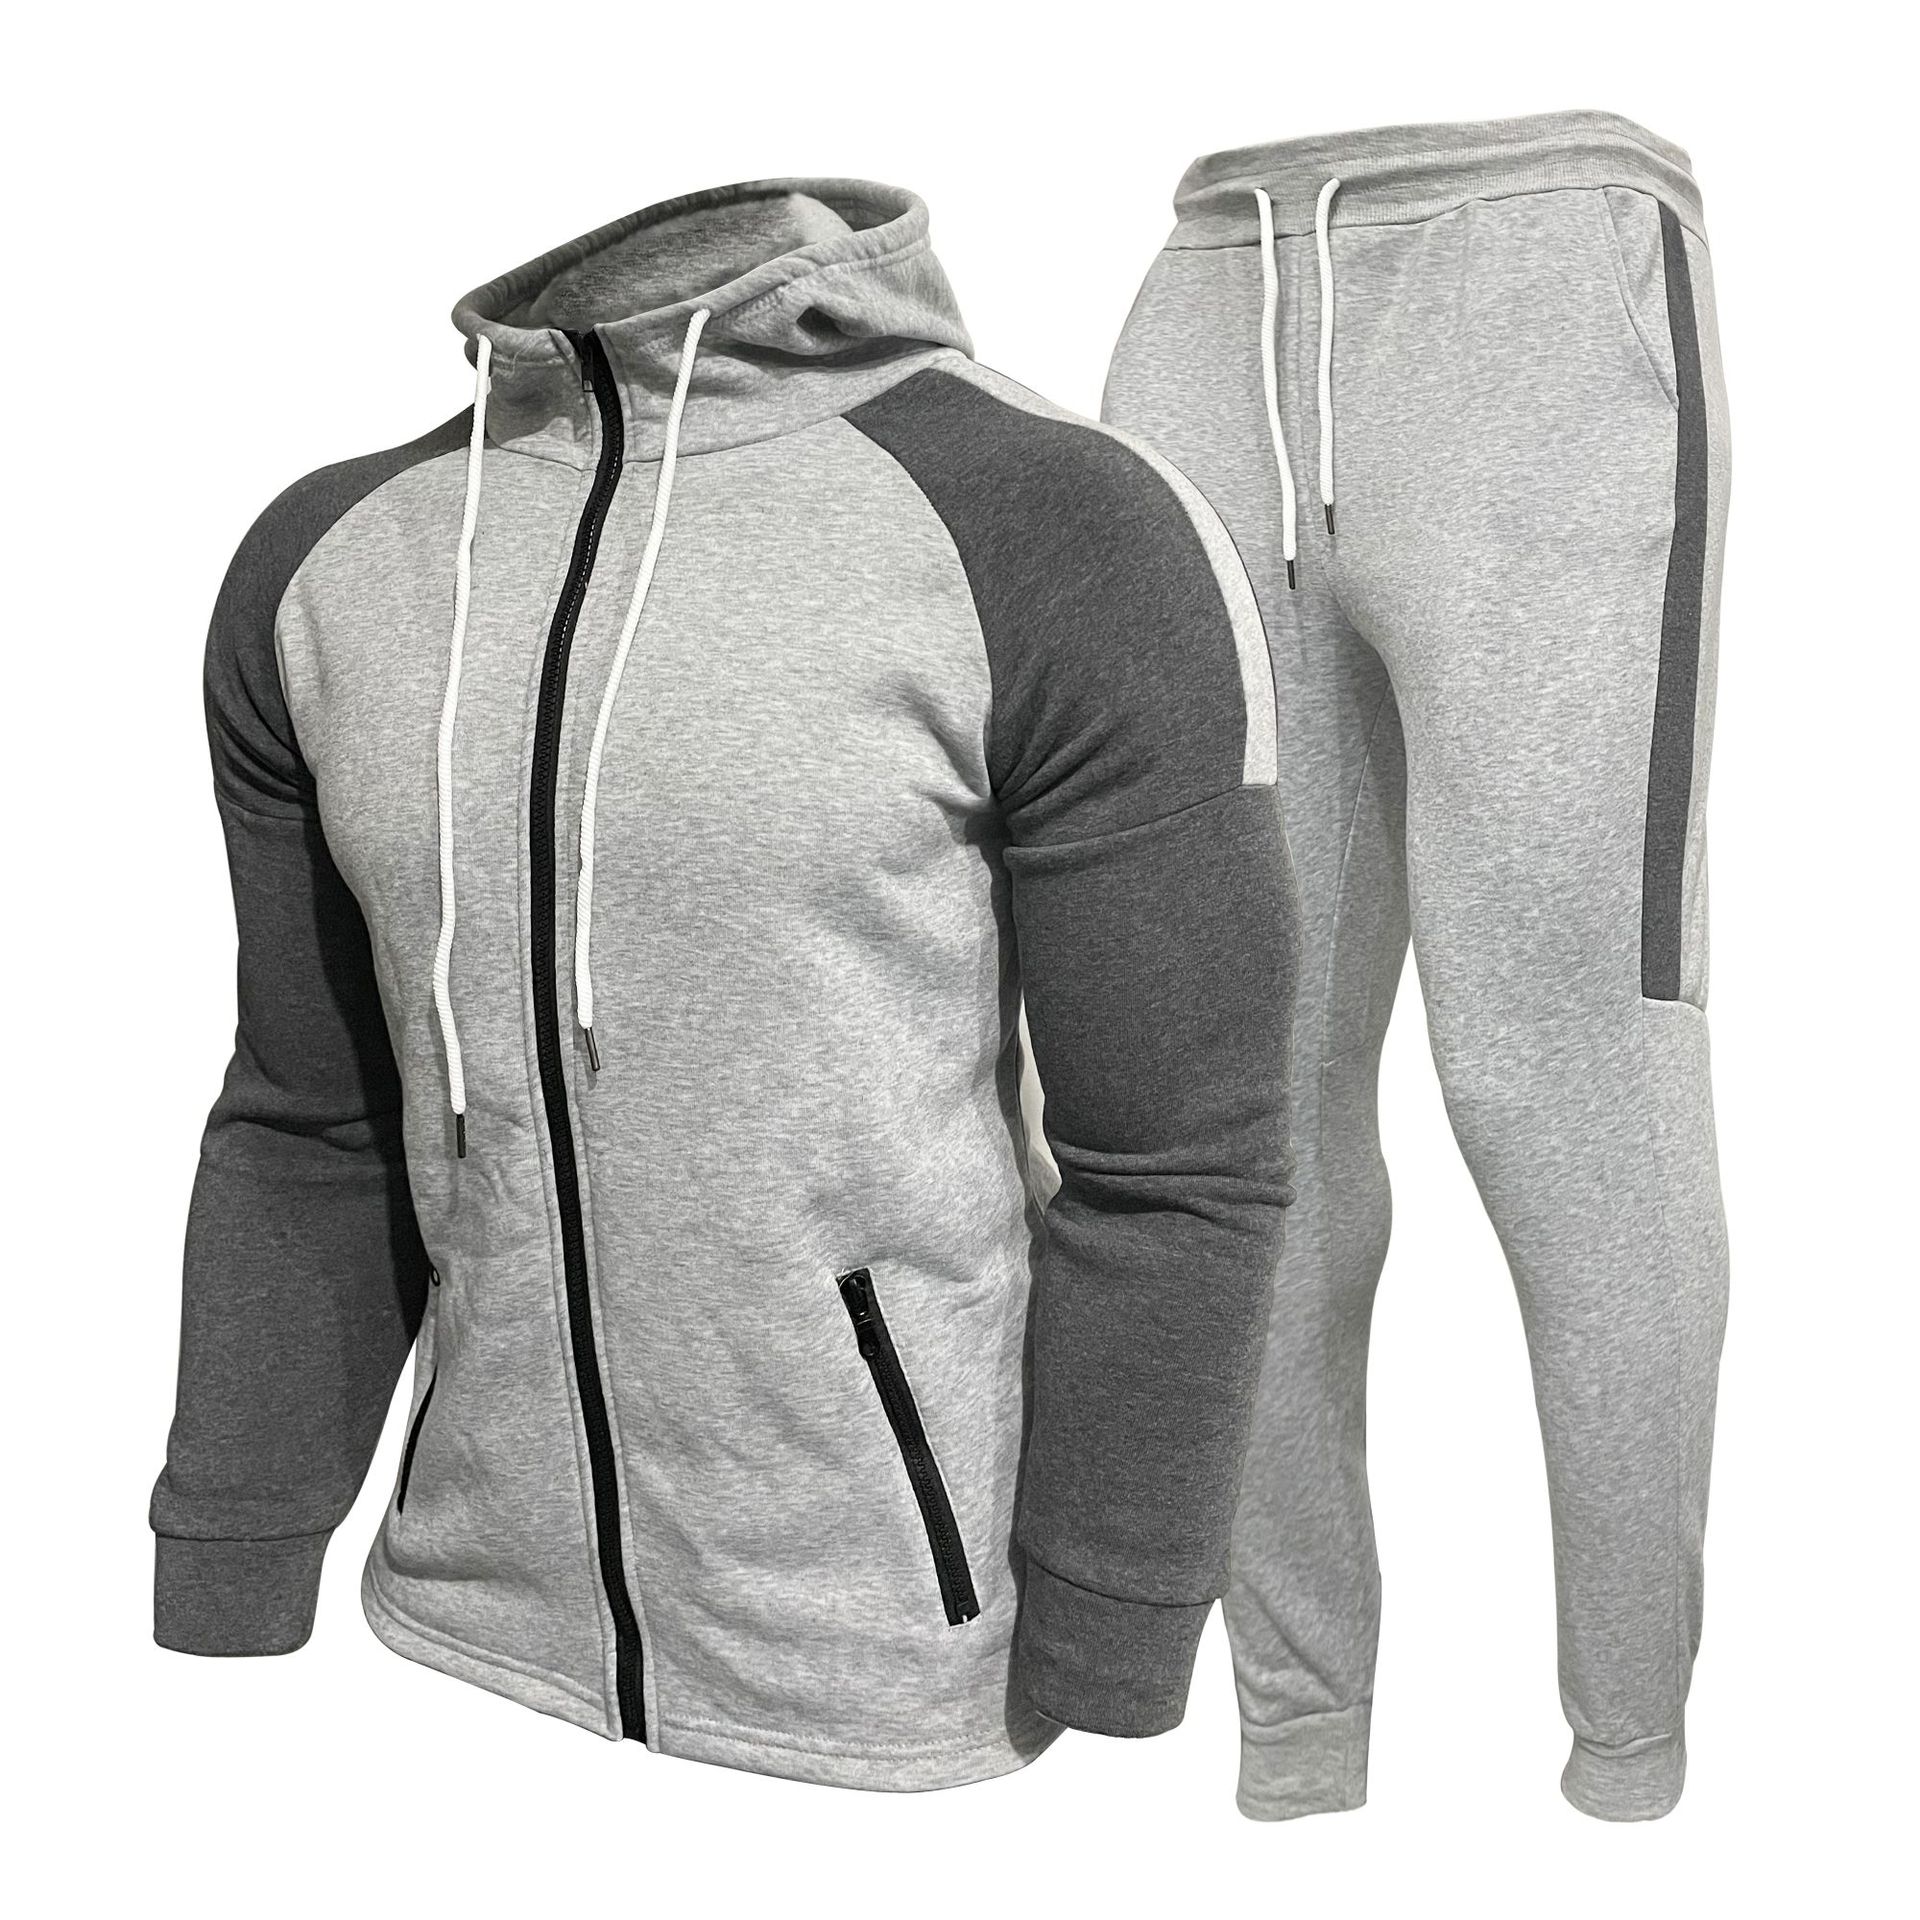 Men's Contrast Casual New Fashion Tracksuit Two Piece Set-poisonstreetwear.com